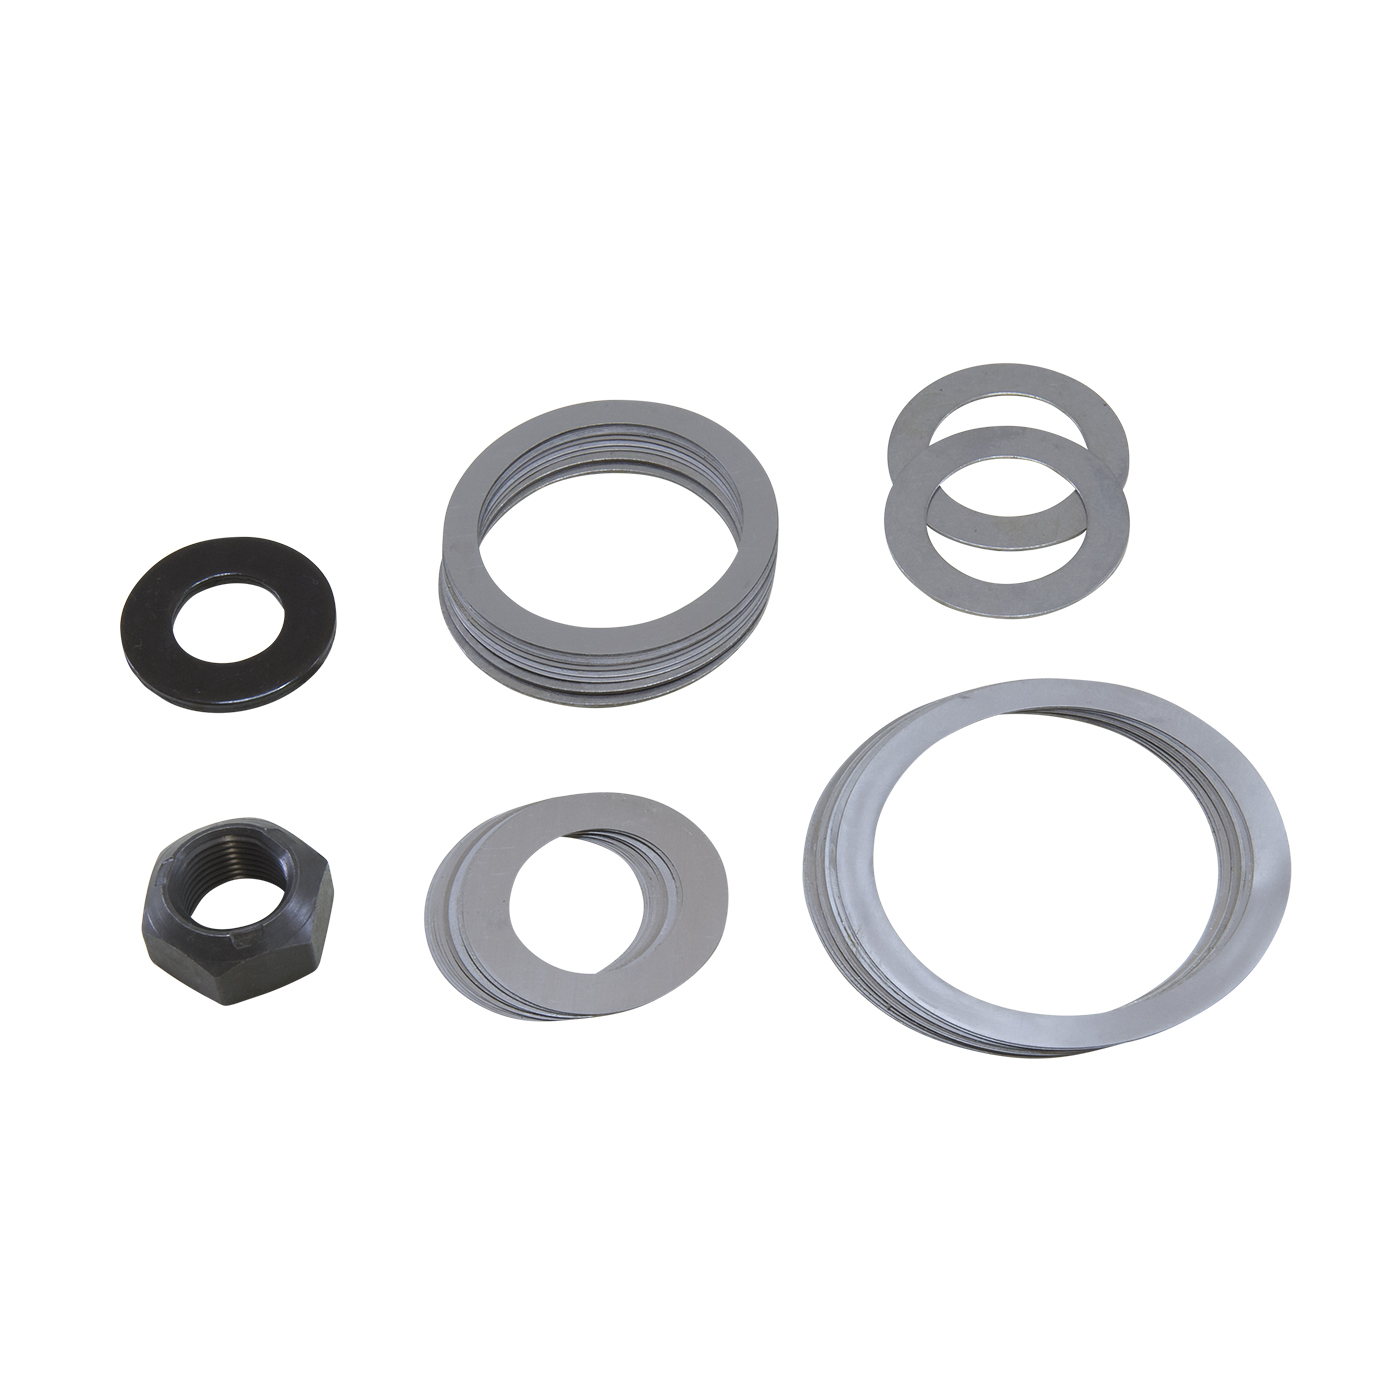 Replacement Shim Kit for Dana 30 Front & Rear Yukon Gear & Axle also D36ICA & Dana 44ICA. SK 706386 